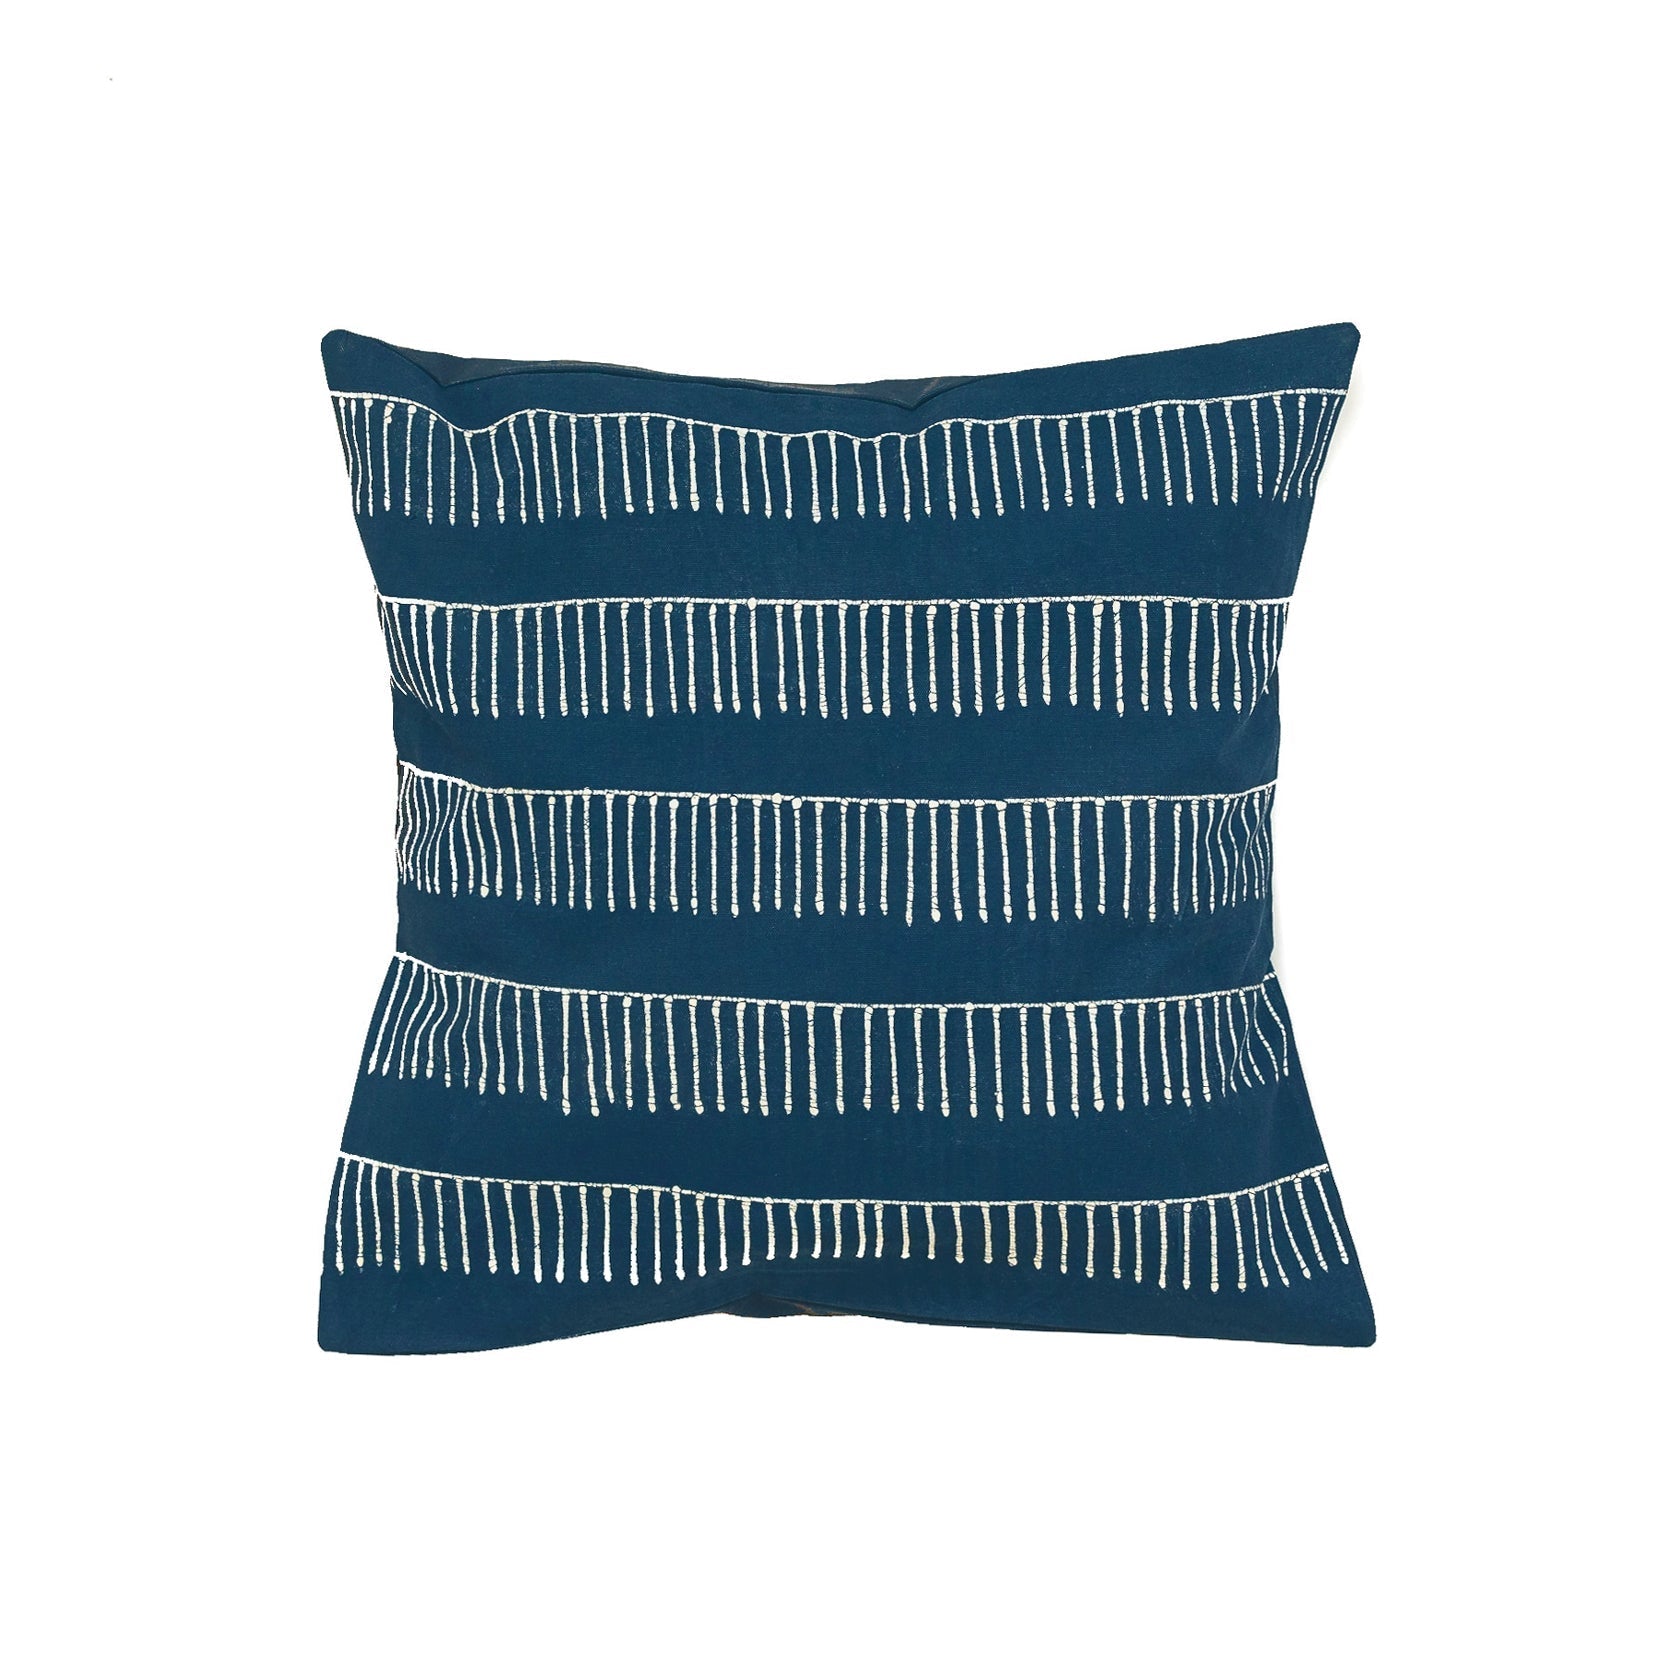 Indigo cushion cover made from 100% cotton with beautiful linear rake patterns.